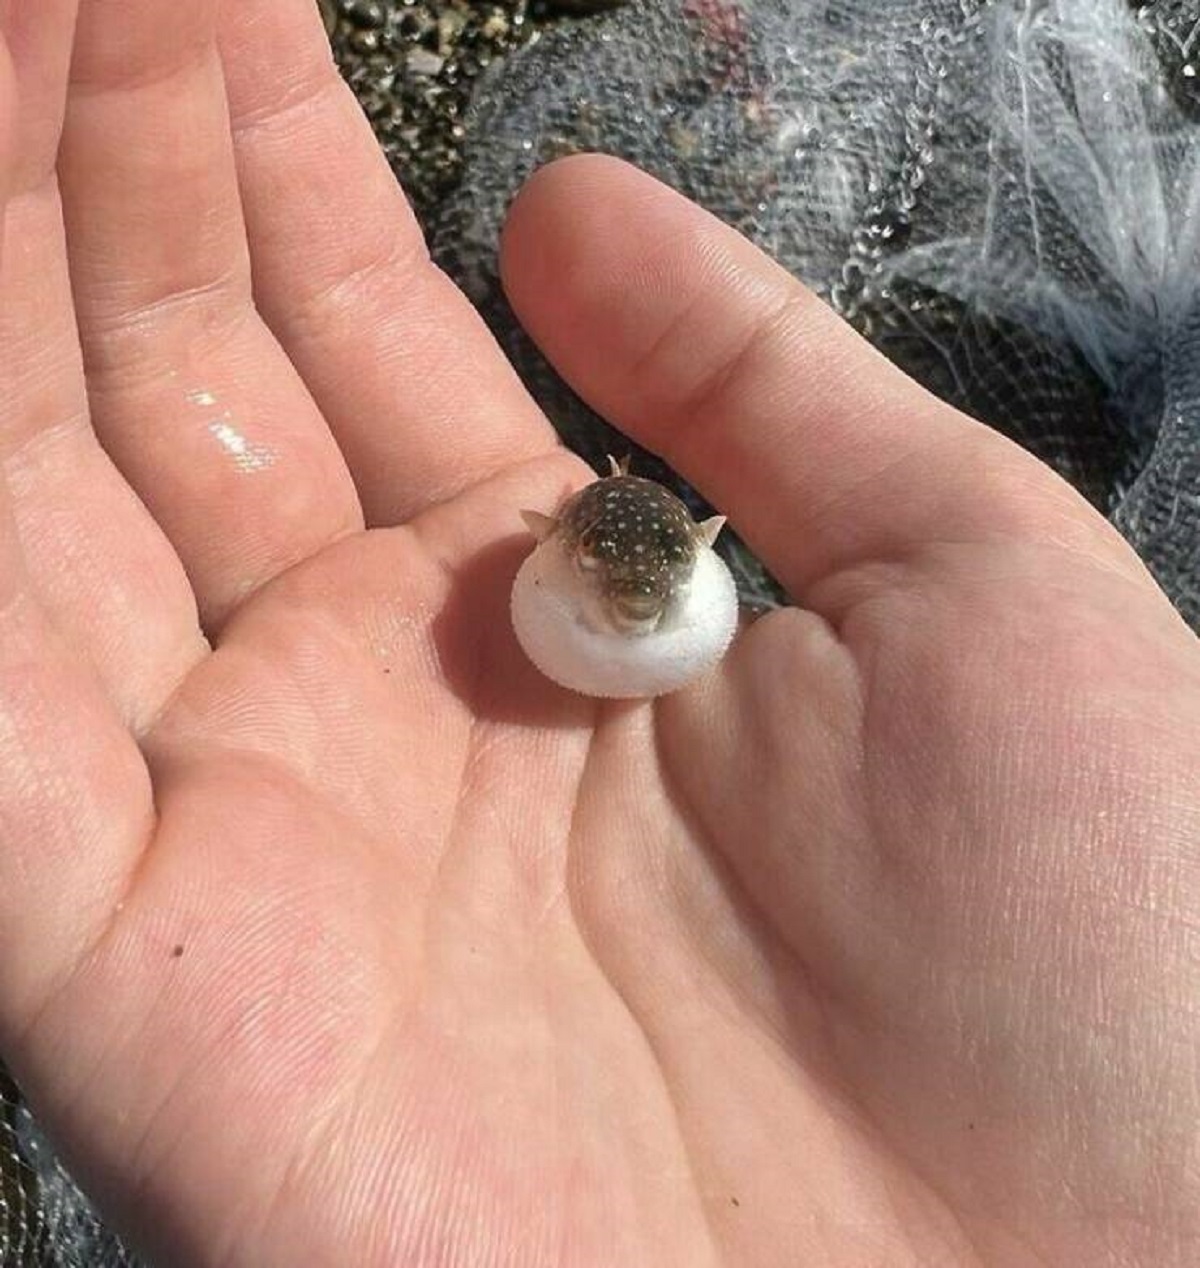 "The Size Of Baby Pufferfishes"